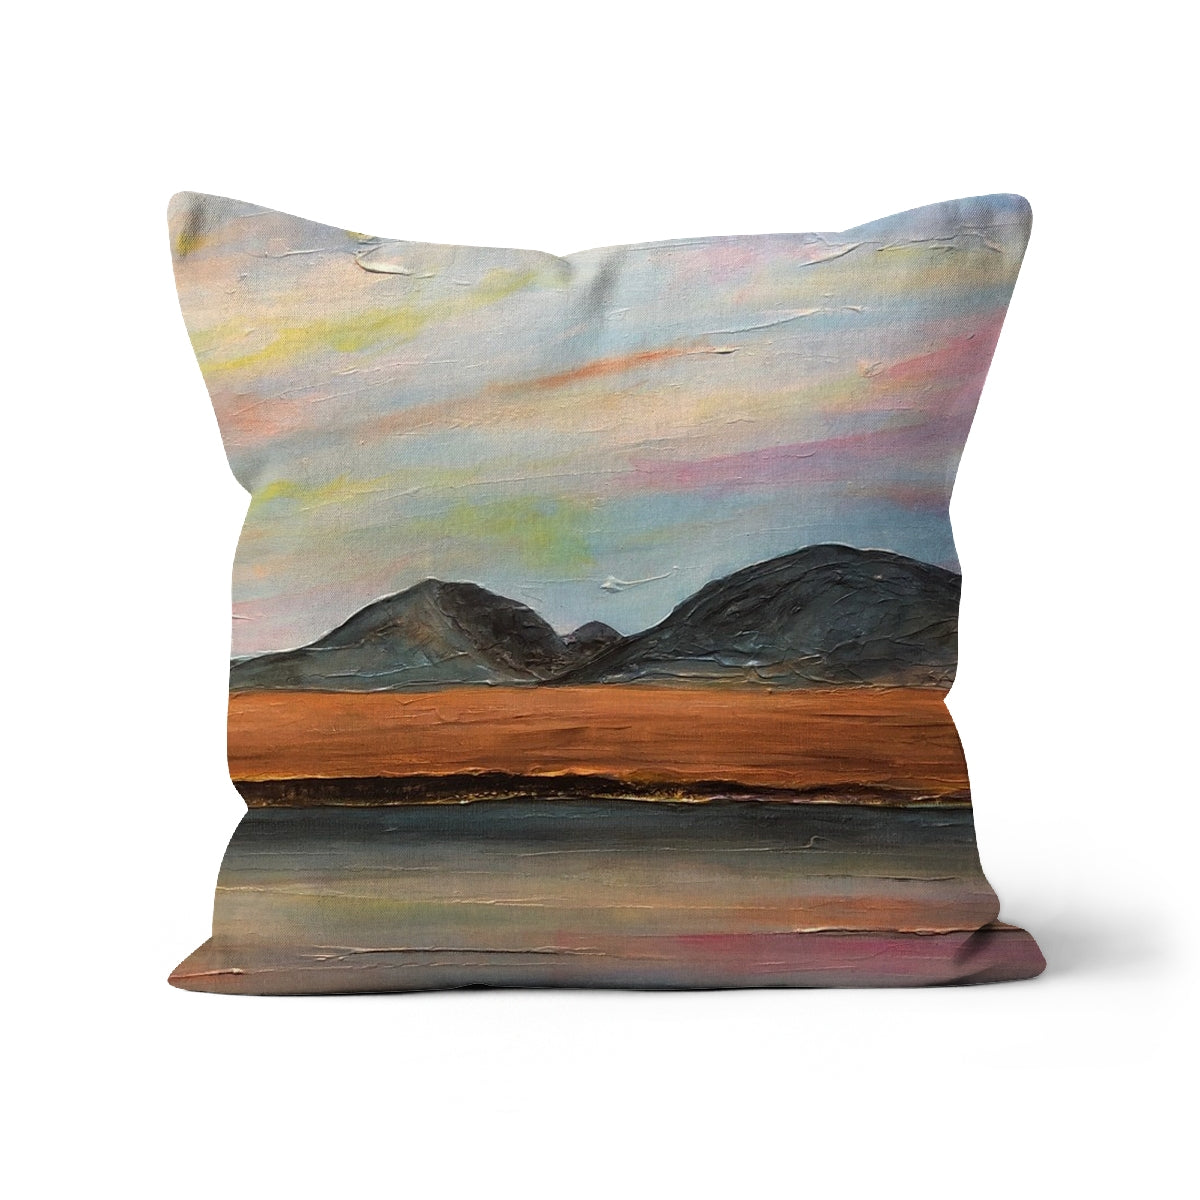 Jura Dawn Art Gifts Cushion-Cushions-Hebridean Islands Art Gallery-Faux Suede-22"x22"-Paintings, Prints, Homeware, Art Gifts From Scotland By Scottish Artist Kevin Hunter